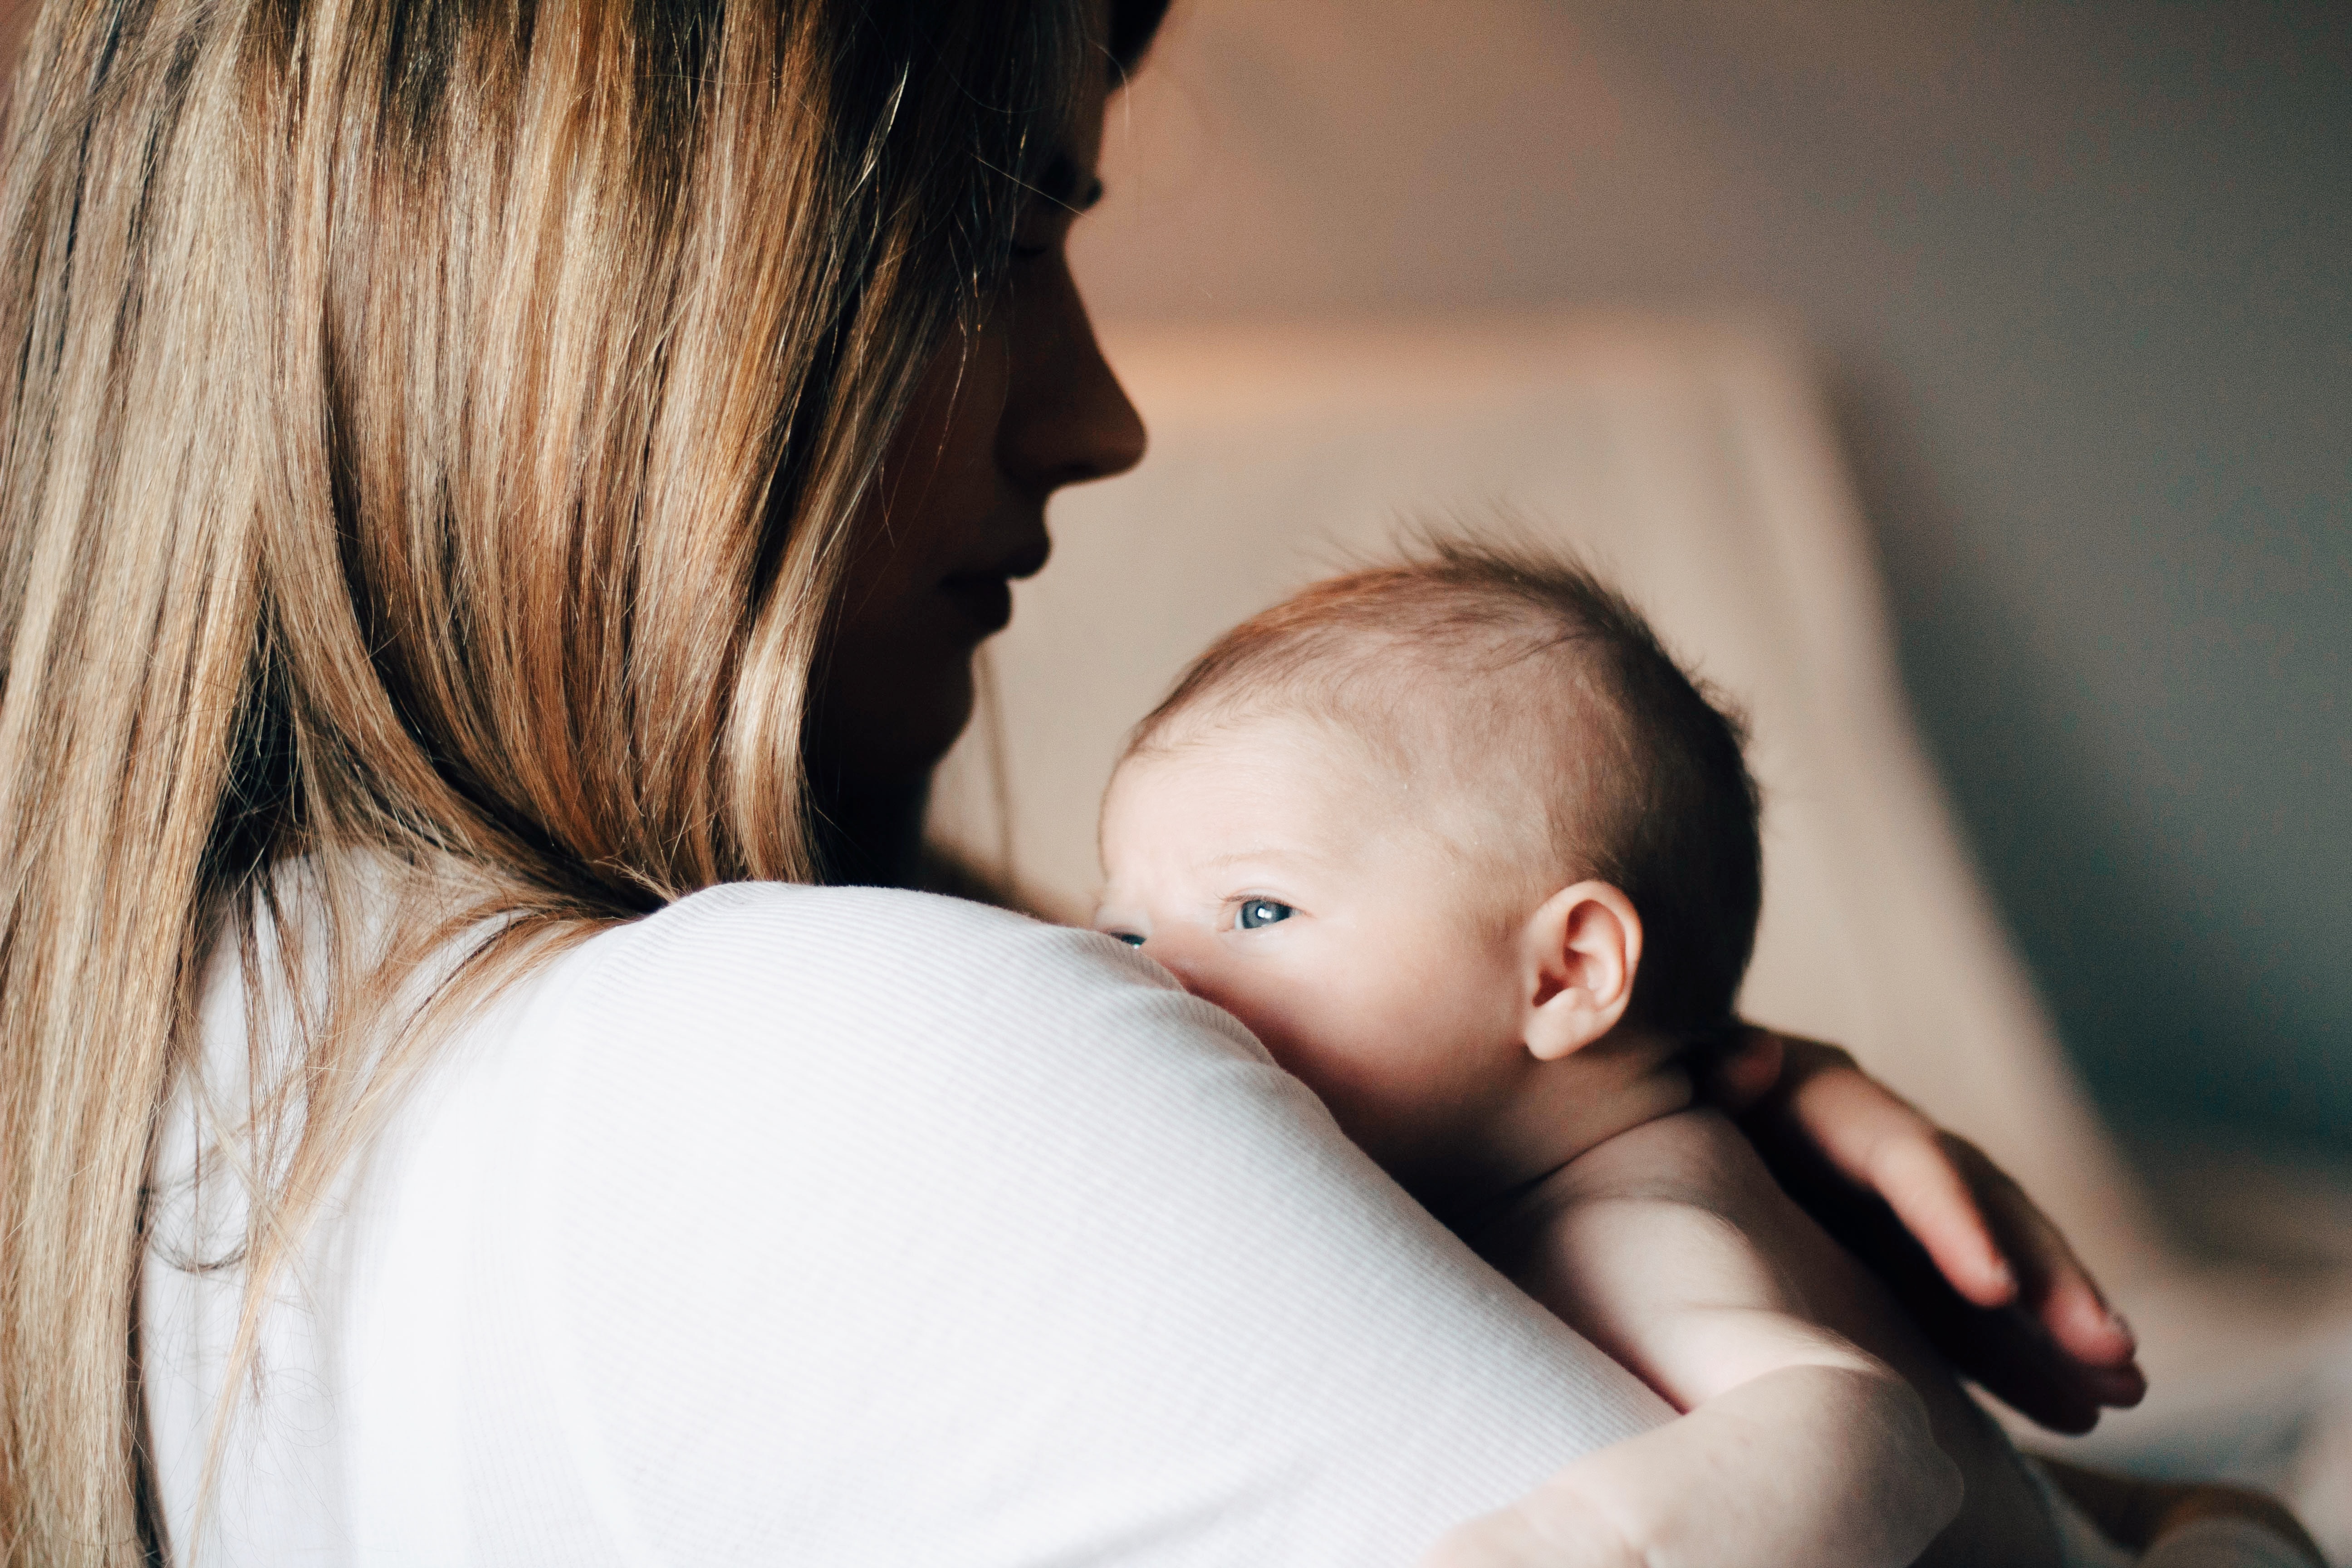 Supporting Mental Health: 3 Tips for Coping With Postpartum Depression